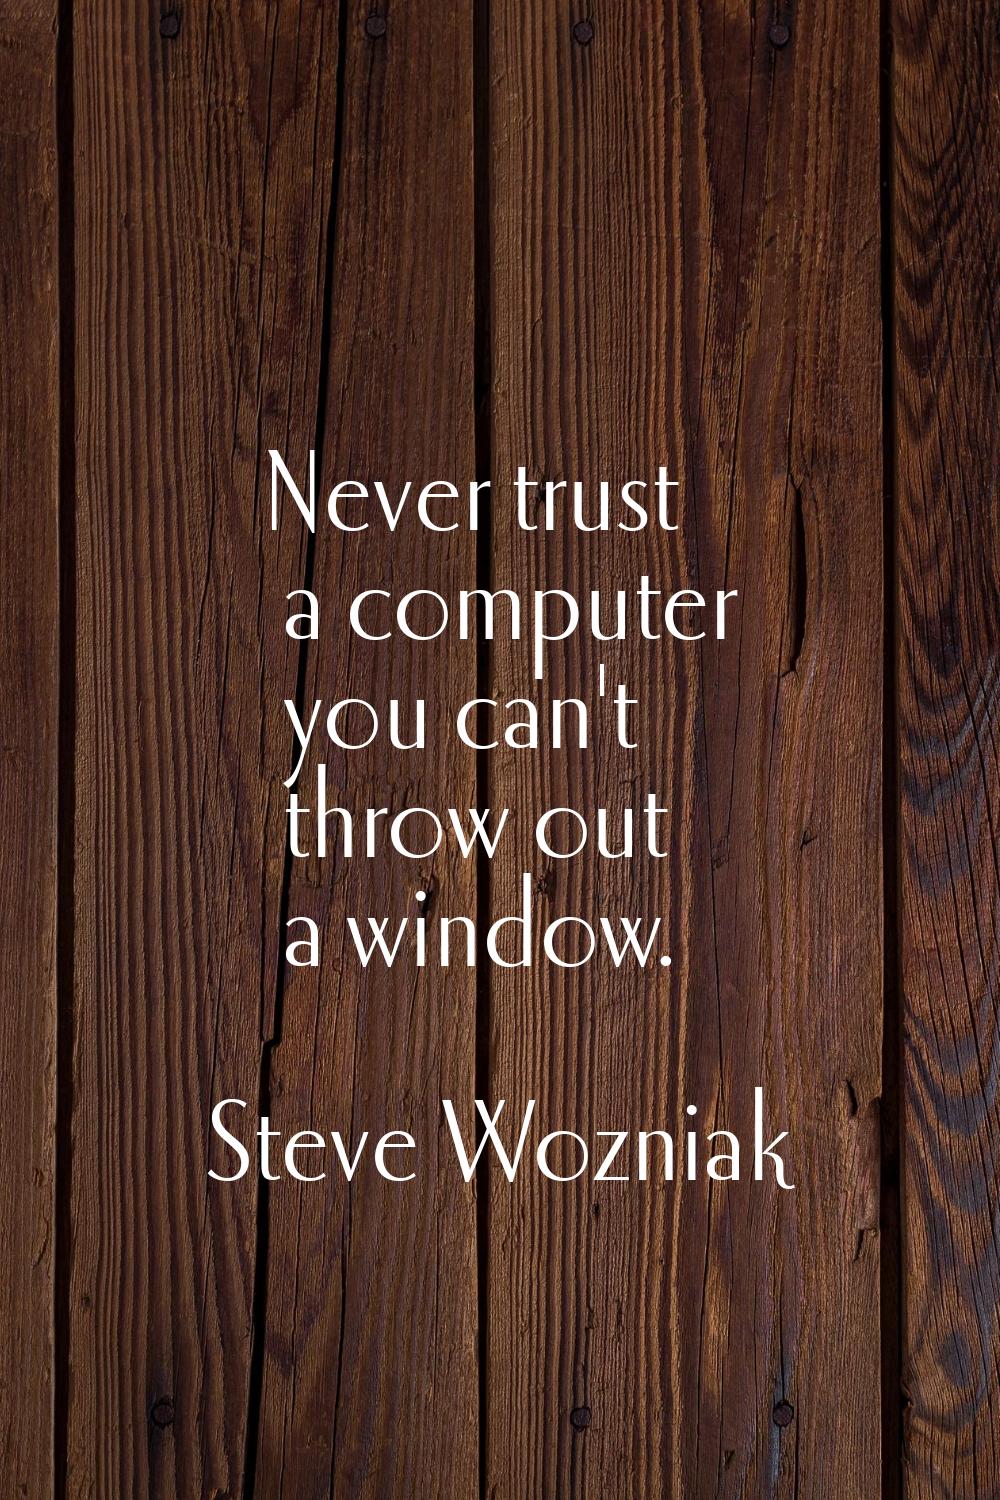 Never trust a computer you can't throw out a window.